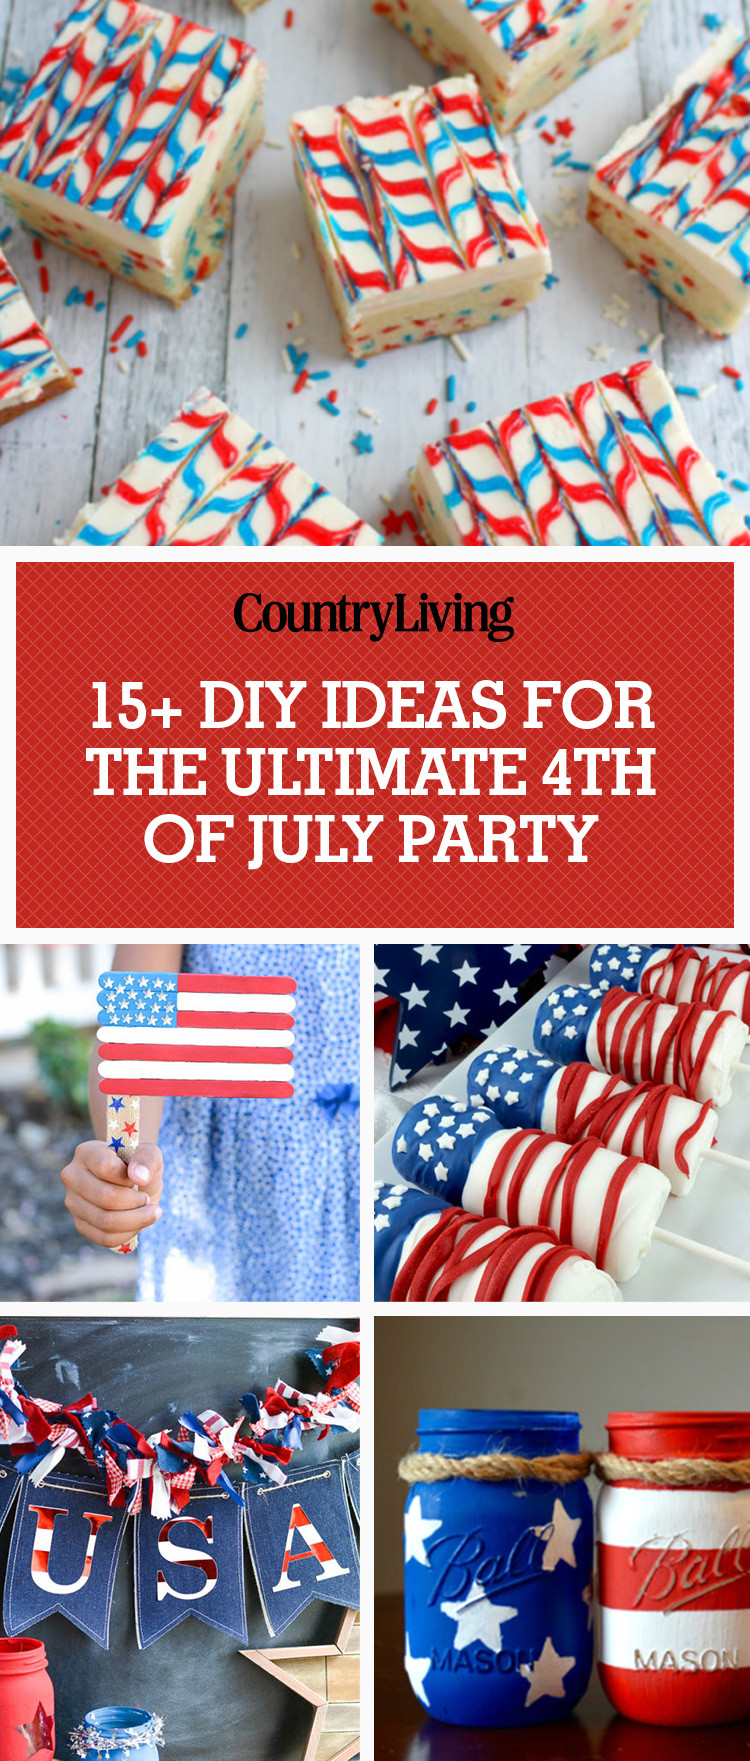 4th Of July Picture Ideas
 16 Best 4th of July Party Ideas Games & DIY Decor for a